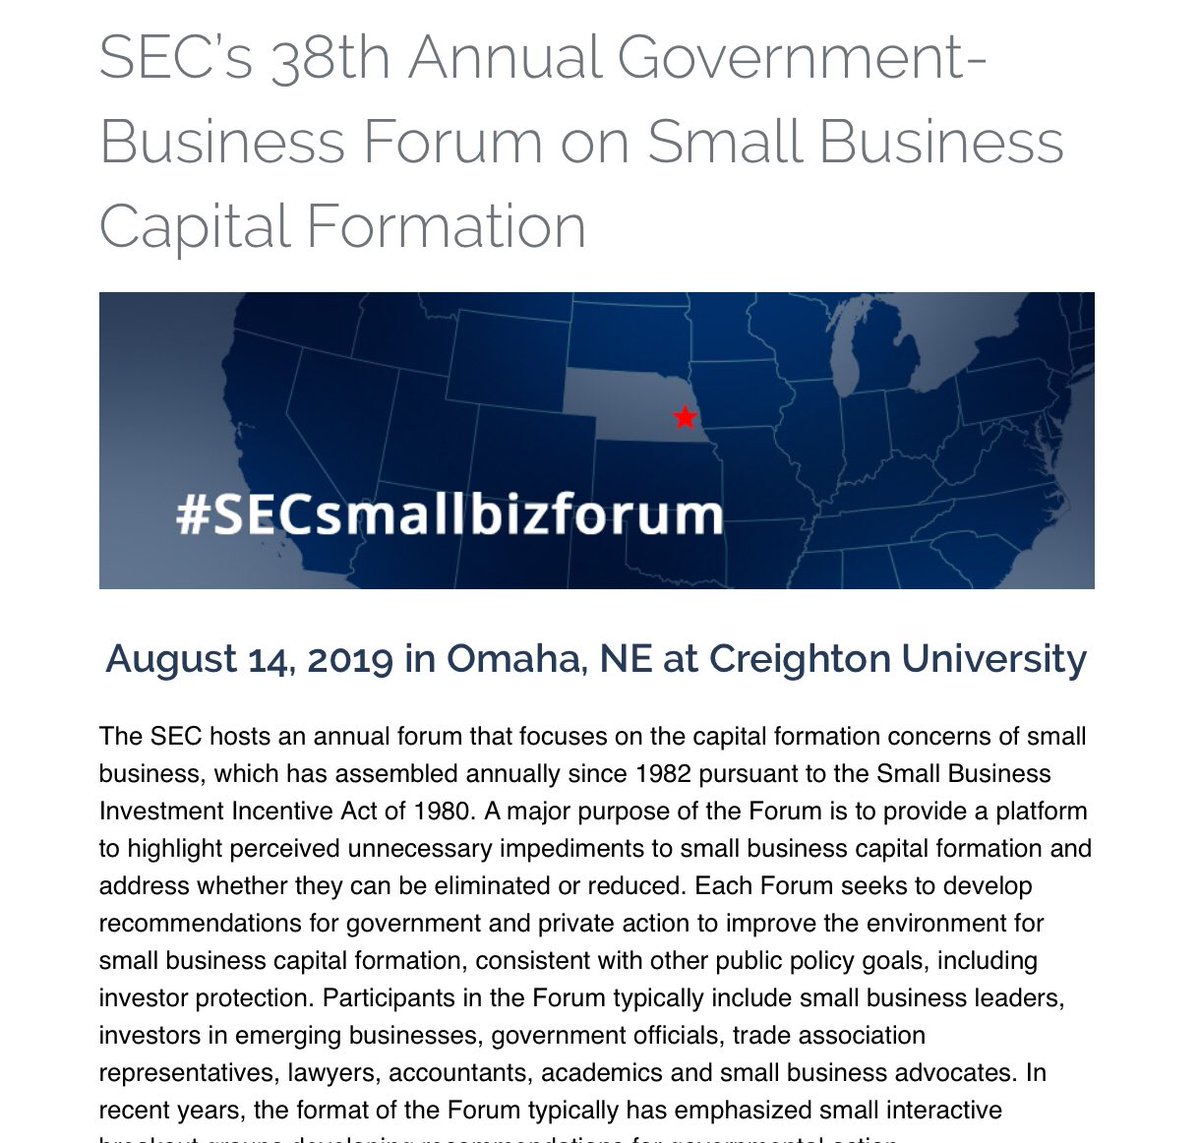 #Entrepreneurs, #investors, and business leaders: The SEC is hosting its annual forum that focuses on the capital formation concerns of small business on August 14 sec.gov/oasb/sbforum #SECsmallbizforum